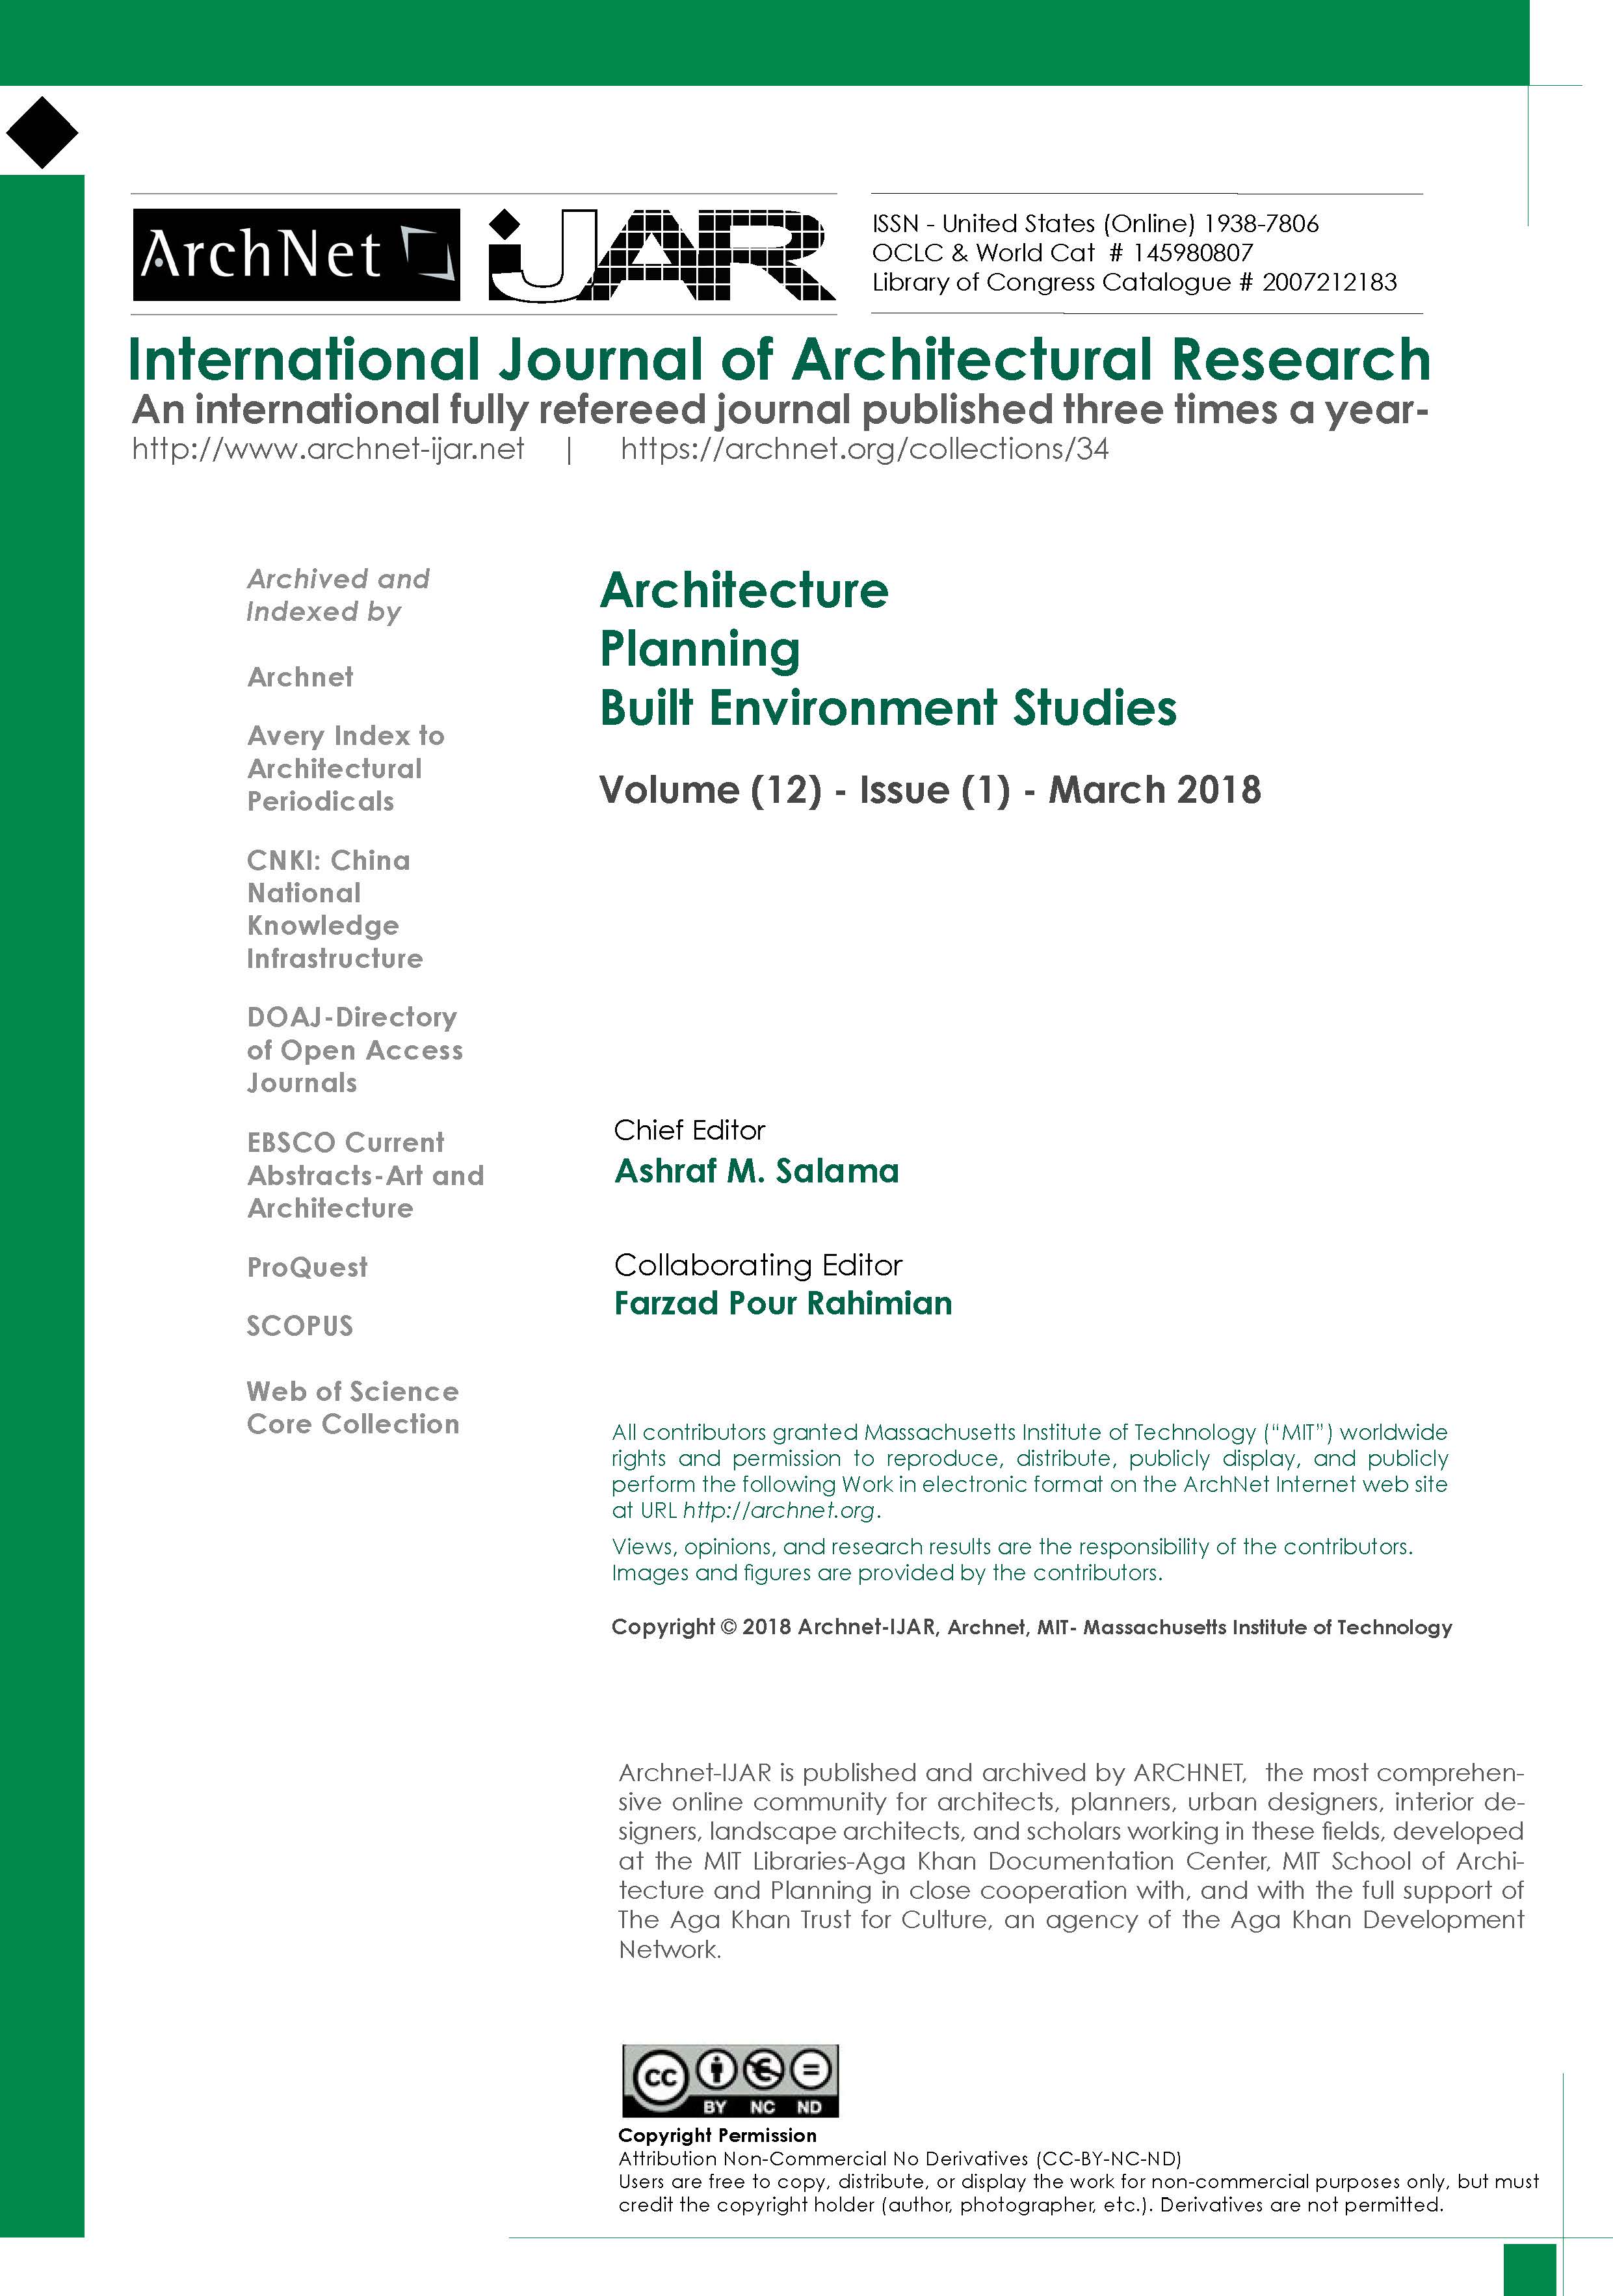 Farzad Pour Rahimian - <div style="text-align: justify;"><span style="color: rgb(1, 1, 1);">Archnet-IJAR International Journal of Architectural Research is an interdisciplinary, fully-refereed scholarly online journal of architecture, planning, and built environment studies. Two international boards (advisory and editorial) ensure the quality of scholarly papers and allow for a comprehensive academic review of contributions spanning a wide spectrum of issues, methods, theoretical approaches and architectural and development practices.</span><span class="apple-converted-space" style="color: rgb(1, 1, 1);">&nbsp;</span><br></div><div style="text-align: justify;"><span style="color: rgb(1, 1, 1);"><br></span></div><span style="background-image: initial; background-position: initial; background-size: initial; background-repeat: initial; background-attachment: initial; background-origin: initial; background-clip: initial;"><div style="color: rgb(1, 1, 1); text-align: justify;">ArchNet-IJAR provides a comprehensive academic review of a wide spectrum of issues, methods, and theoretical approaches. It aims to bridge theory and practice in the fields of architectural/design research and urban planning/built environment studies, reporting on the latest research findings and innovative approaches for creating responsive environments.</div></span>